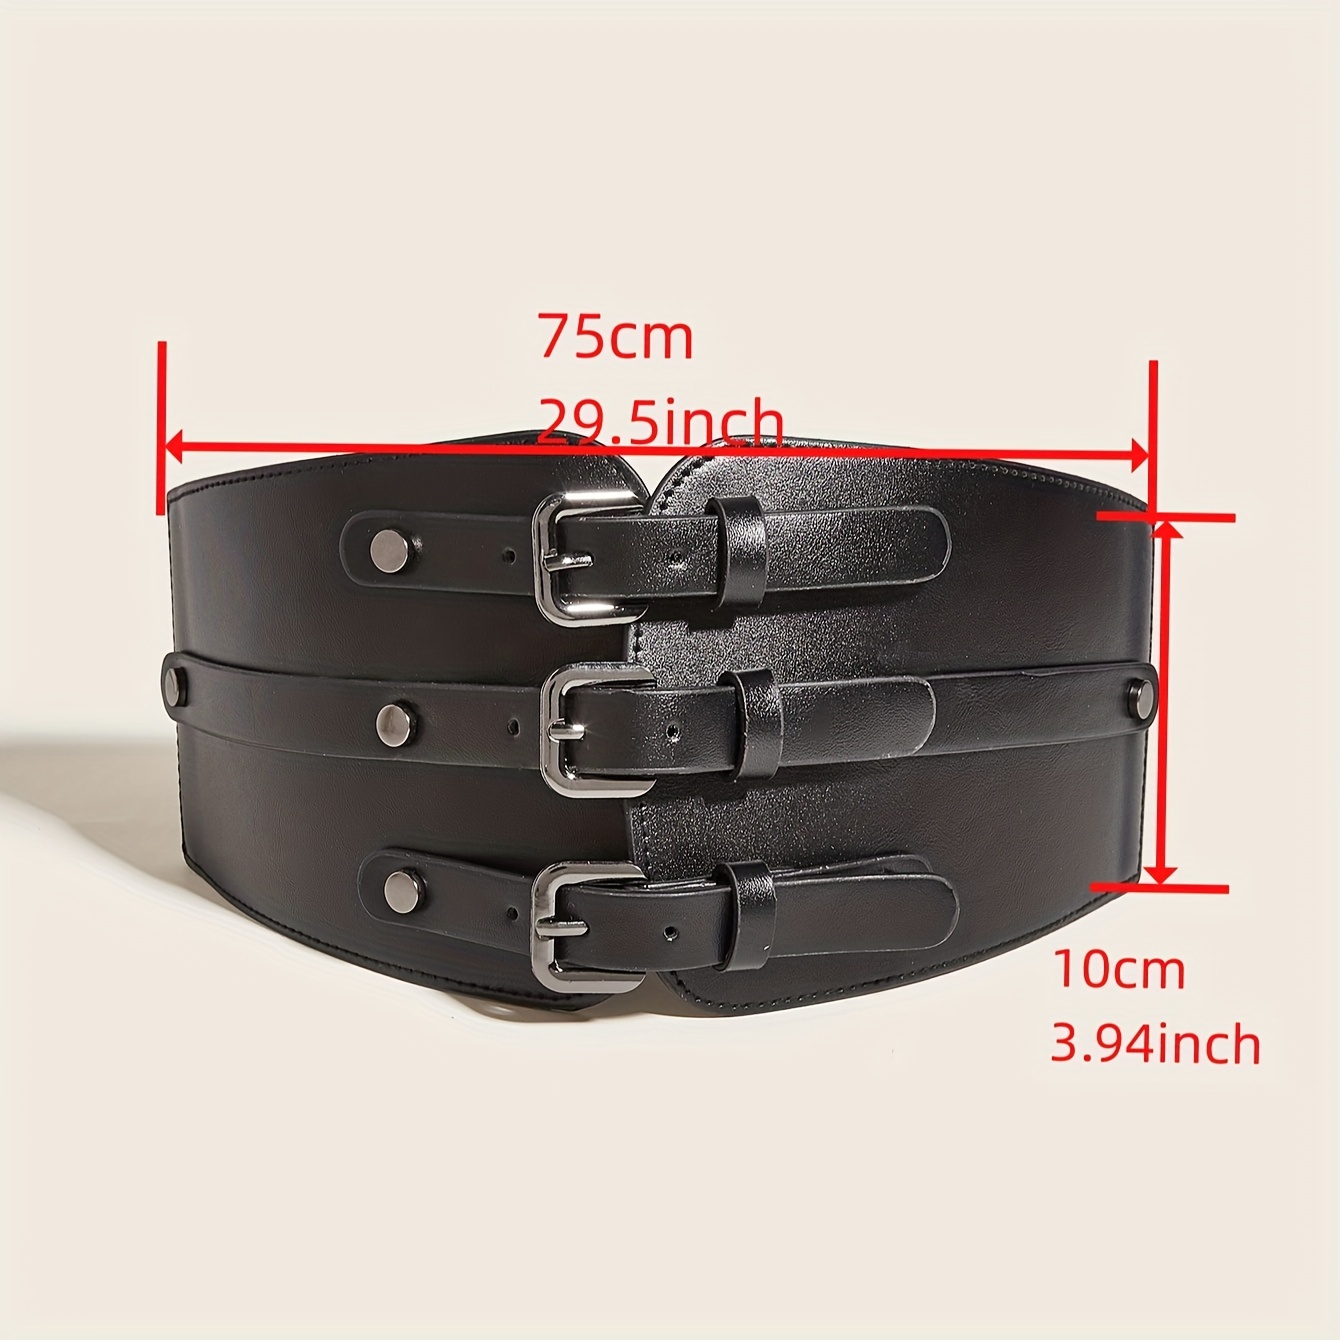 Women Lady Tied PU Leather Corset Waist Wide Belt Cincher Elastic Stretchy  Band 